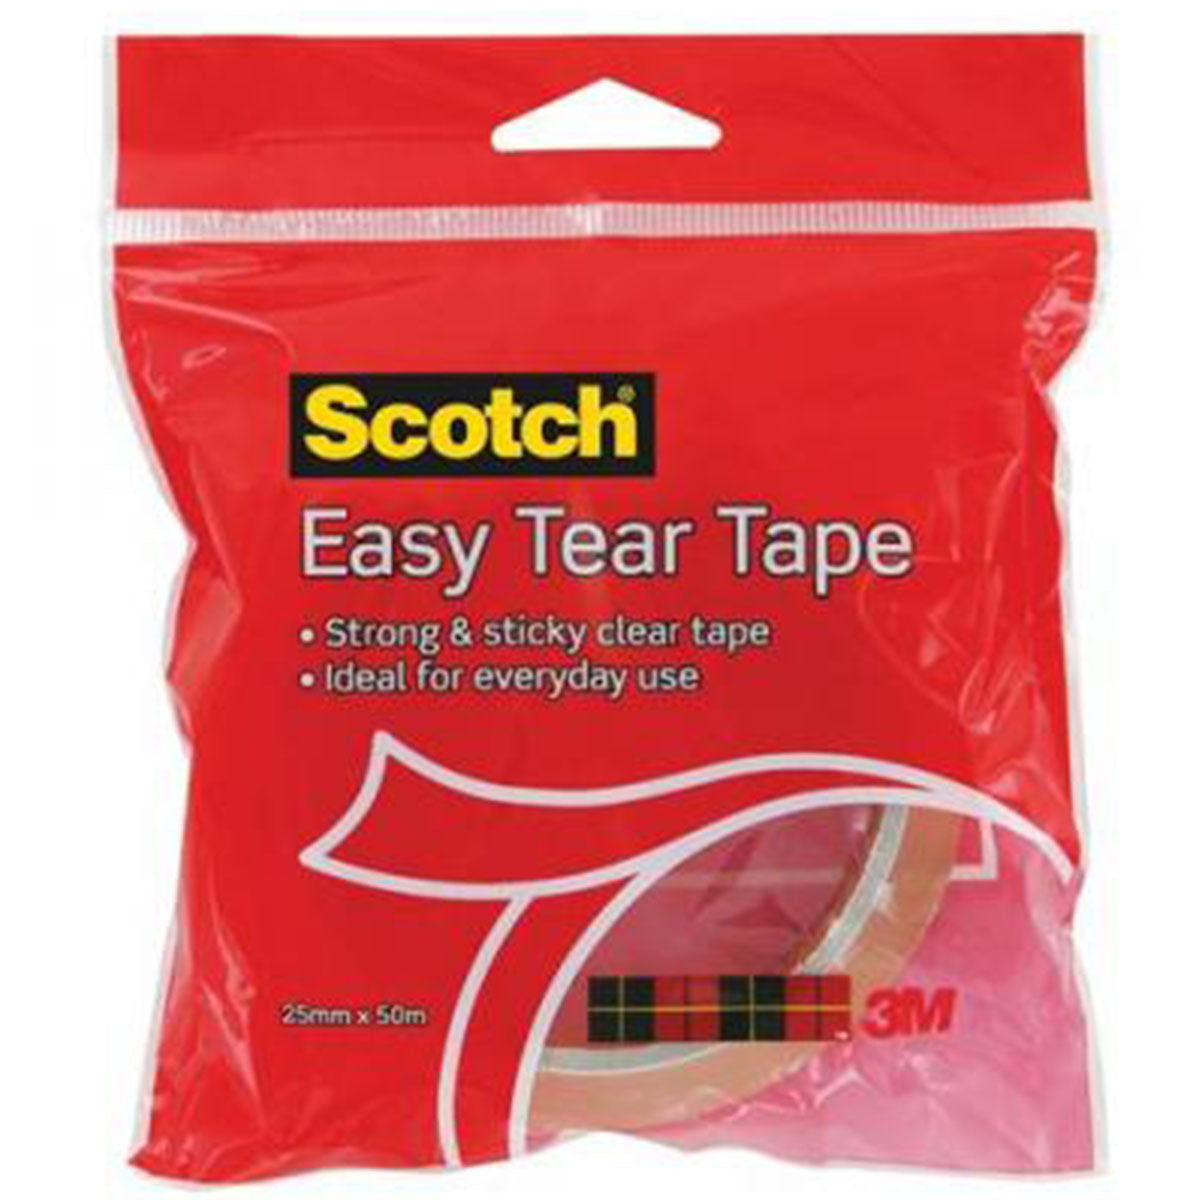 Scotch - Easy Tear Tape - 3M (25mm x 50m) - Continental Food Store